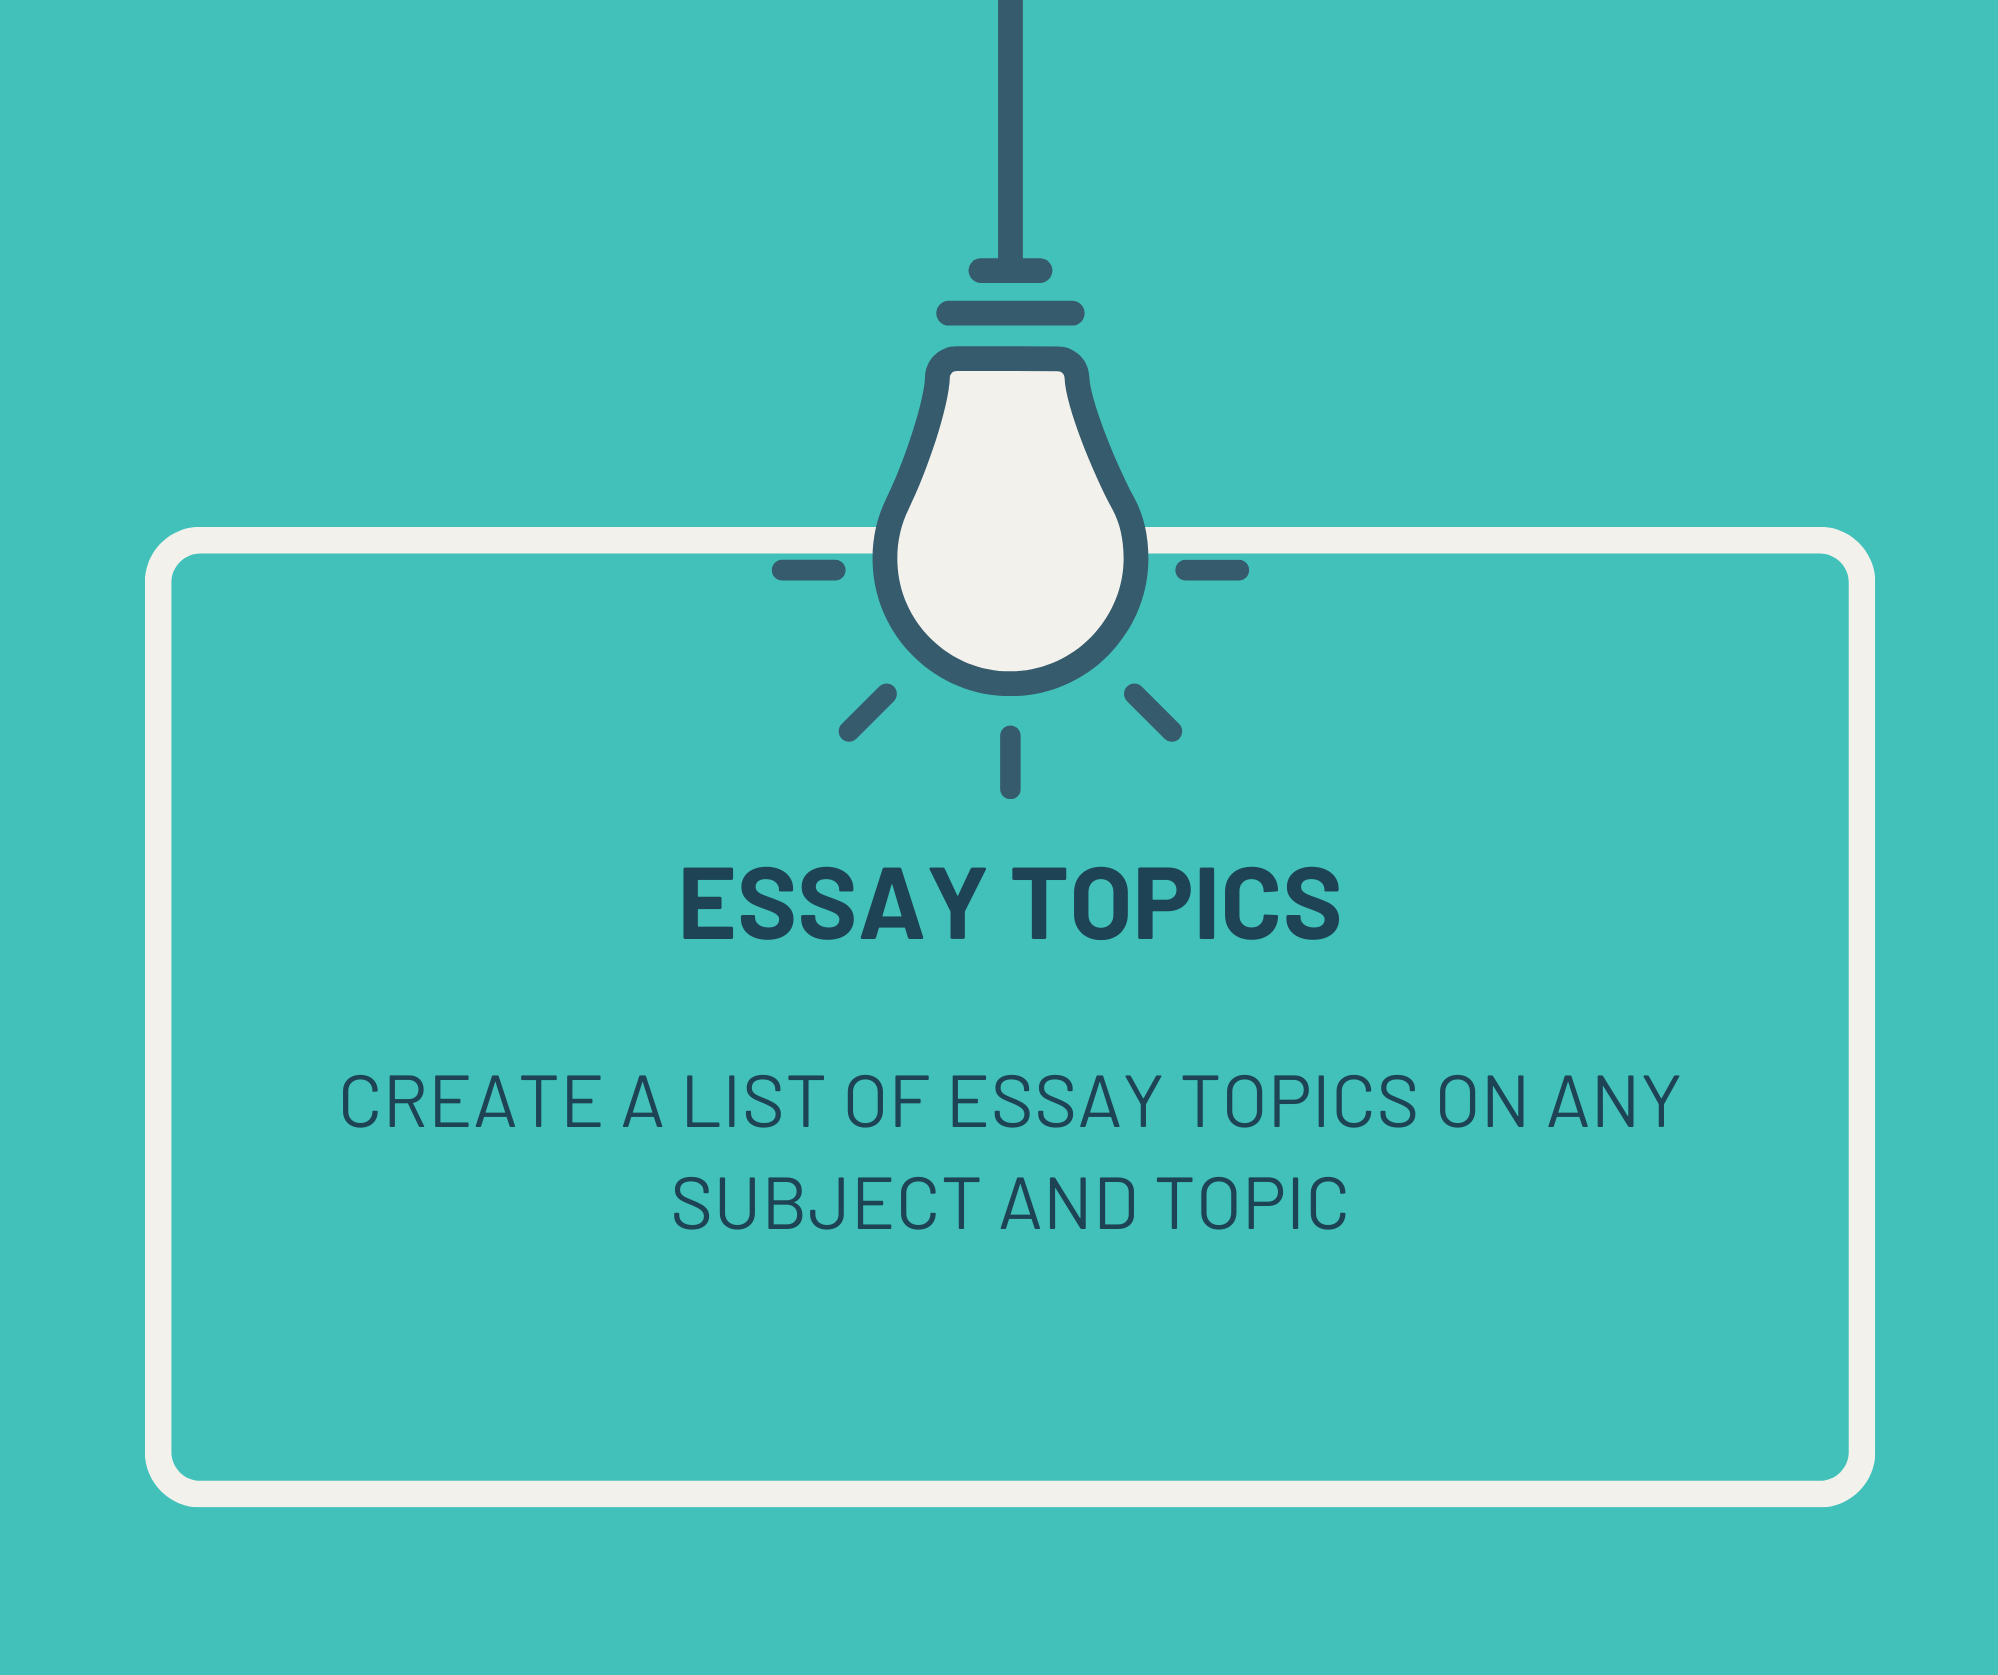 Essay Topics with an AI Chatbot